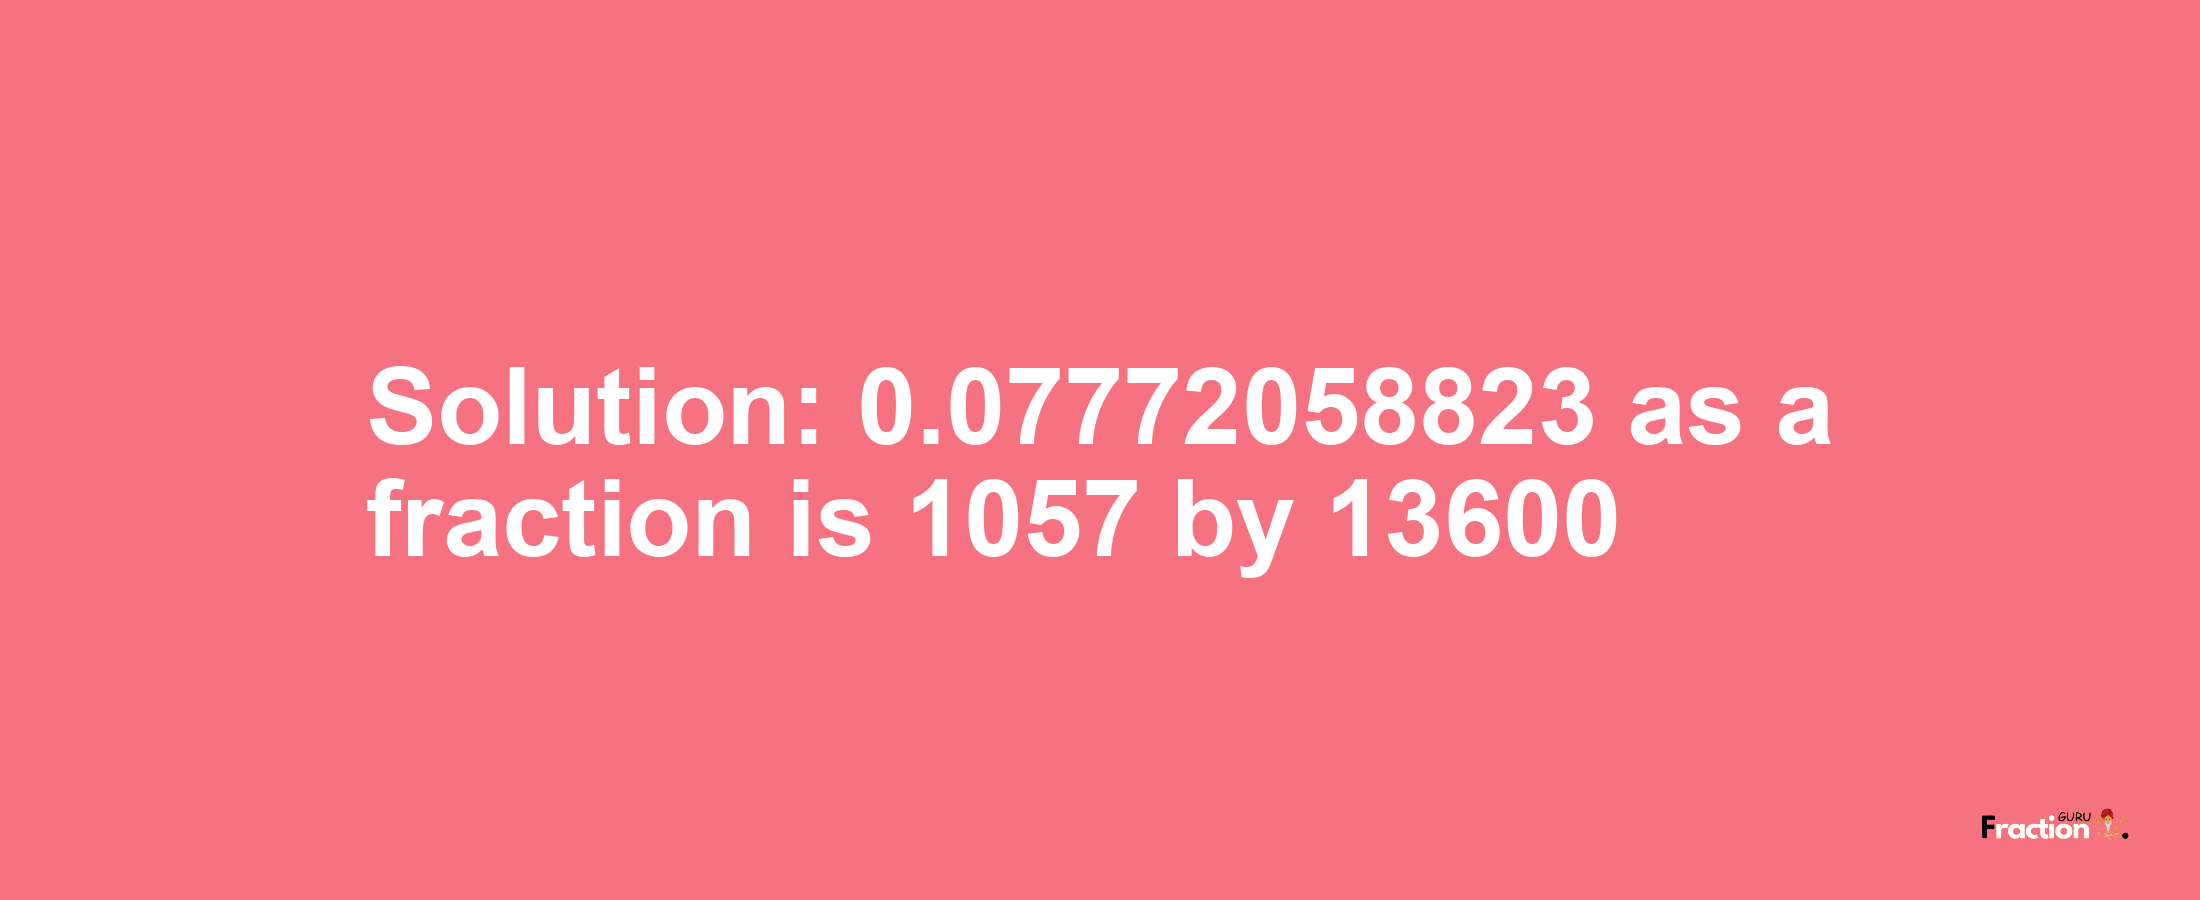 Solution:0.07772058823 as a fraction is 1057/13600